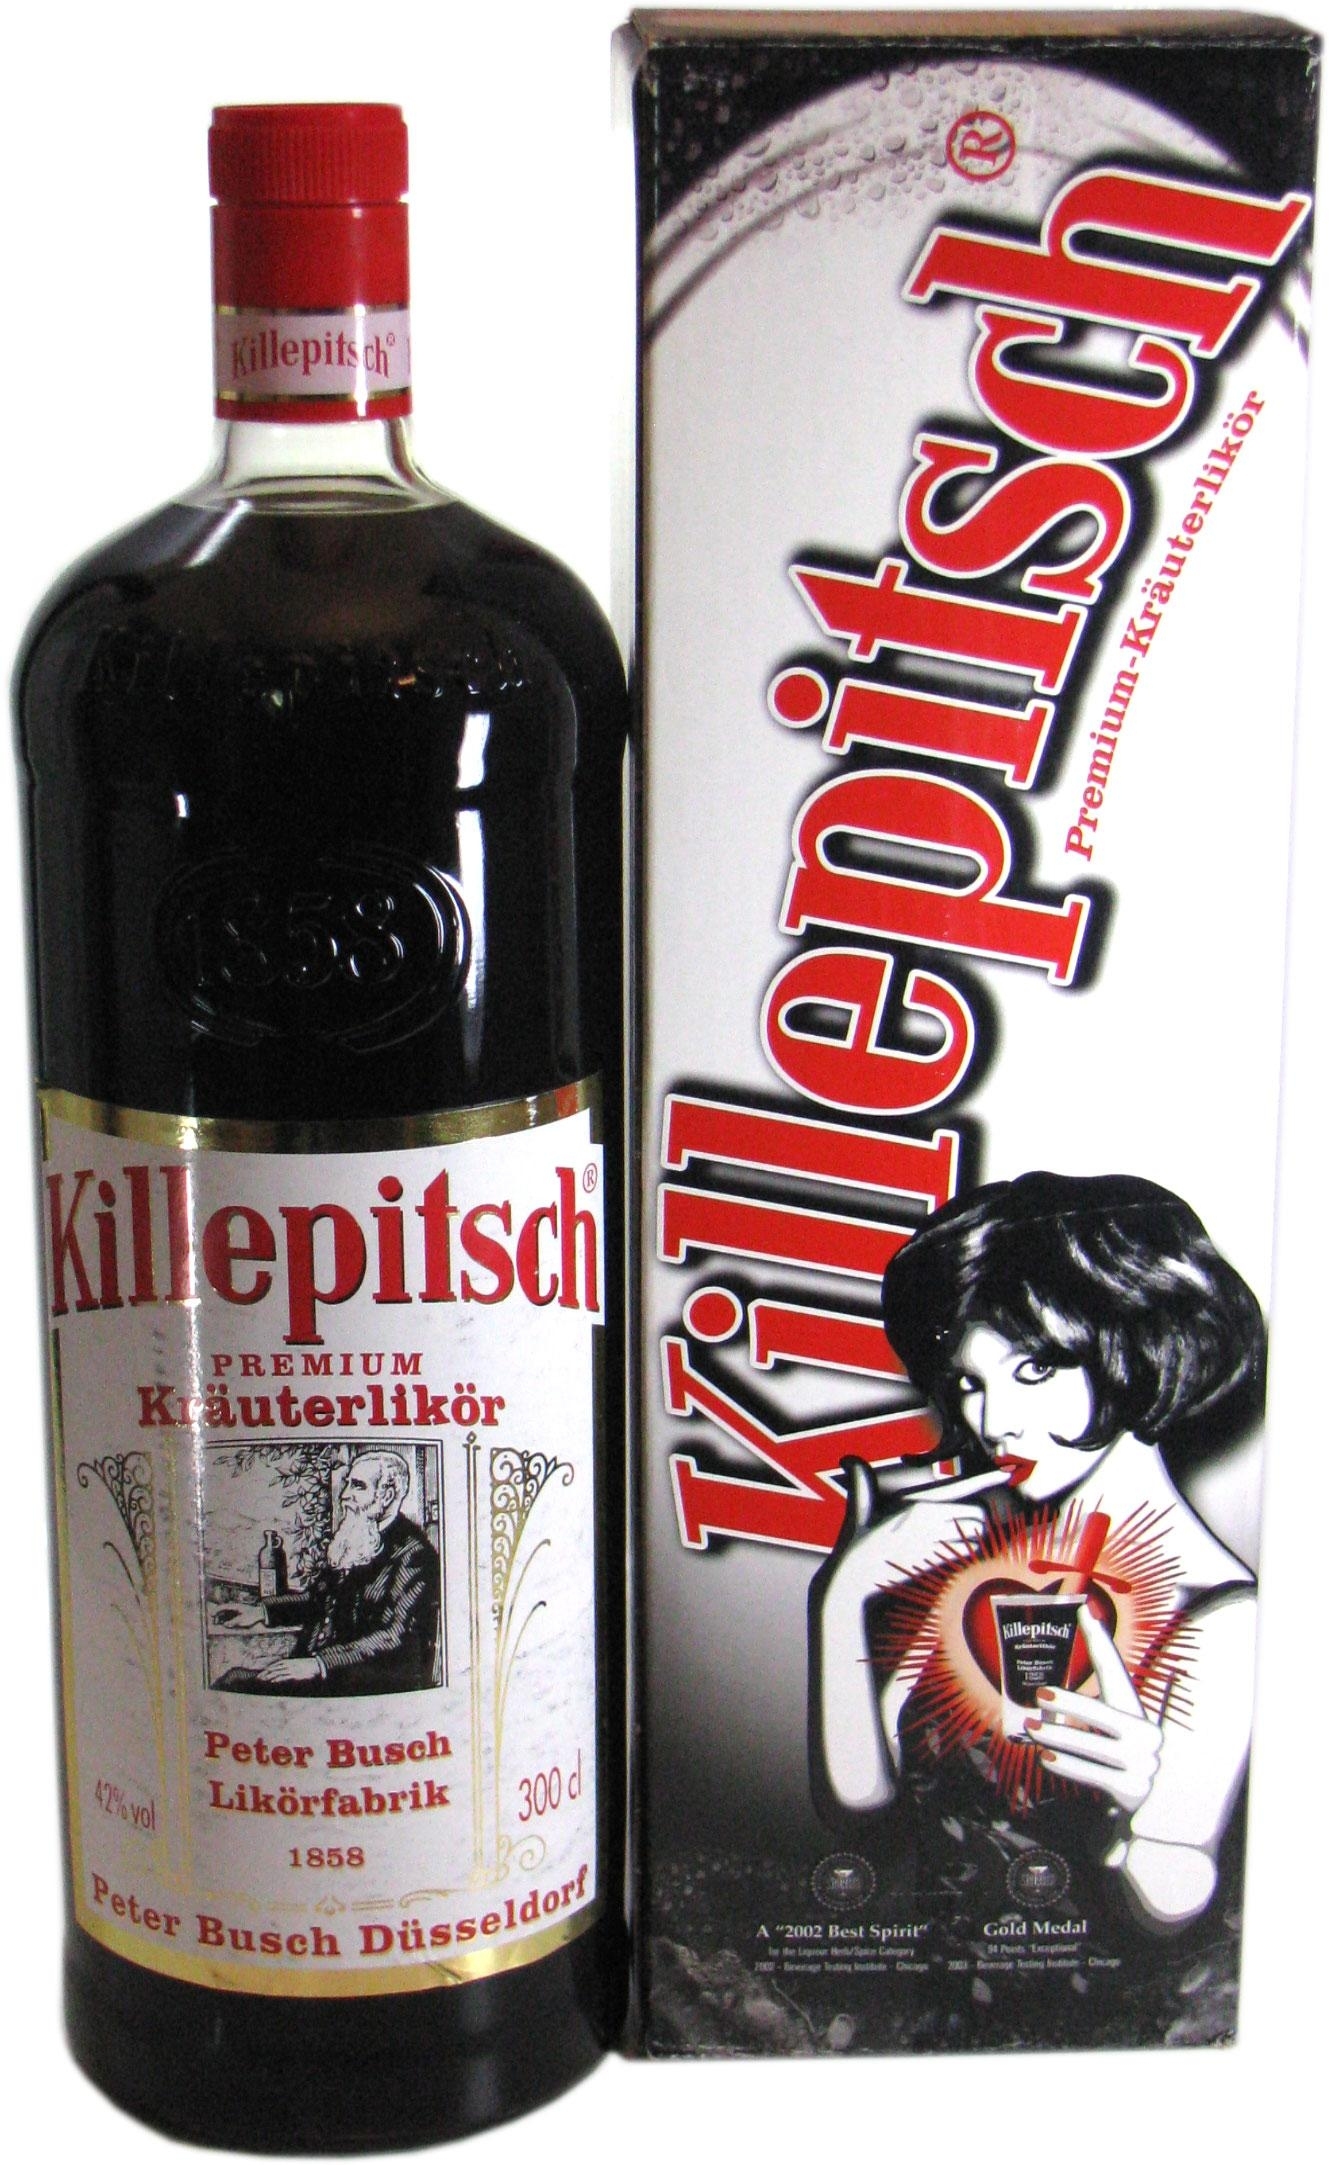 worldwidespirits = box | litre EUR31.65 Germany</b><BR><BR>1 from 3.0l with liqueur big gift - herb bottle b>Killepitsch